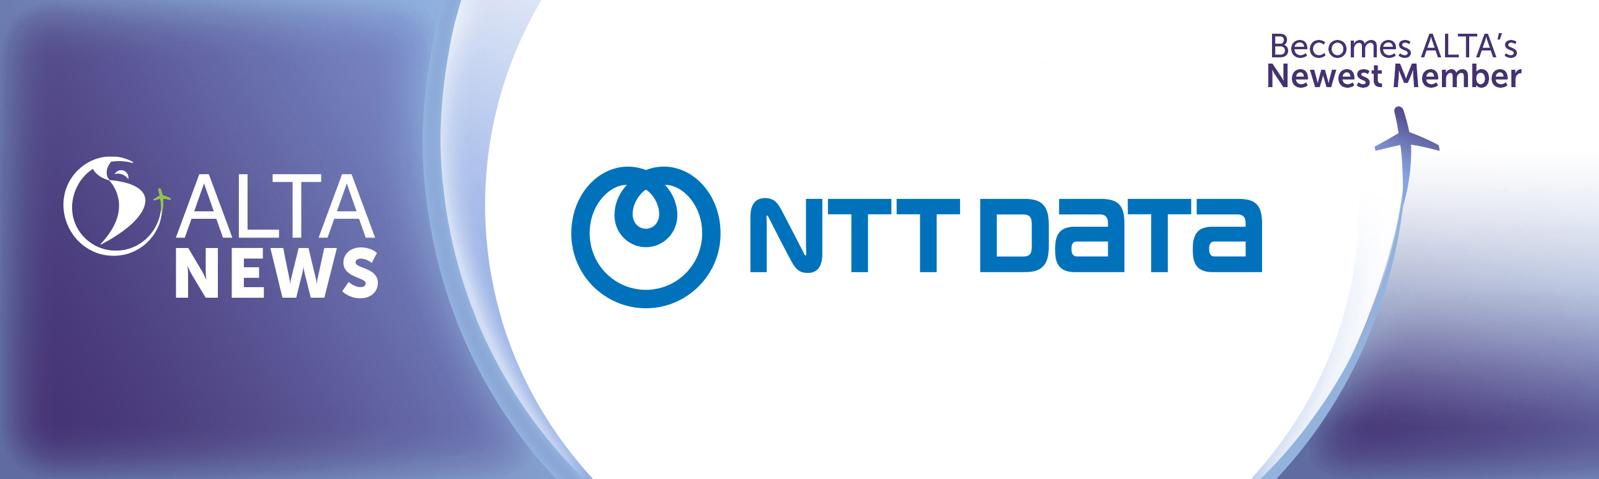 ALTA NEWS - NTT DATA joins ALTA to propel aviation innovation in Latin America and the Caribbean